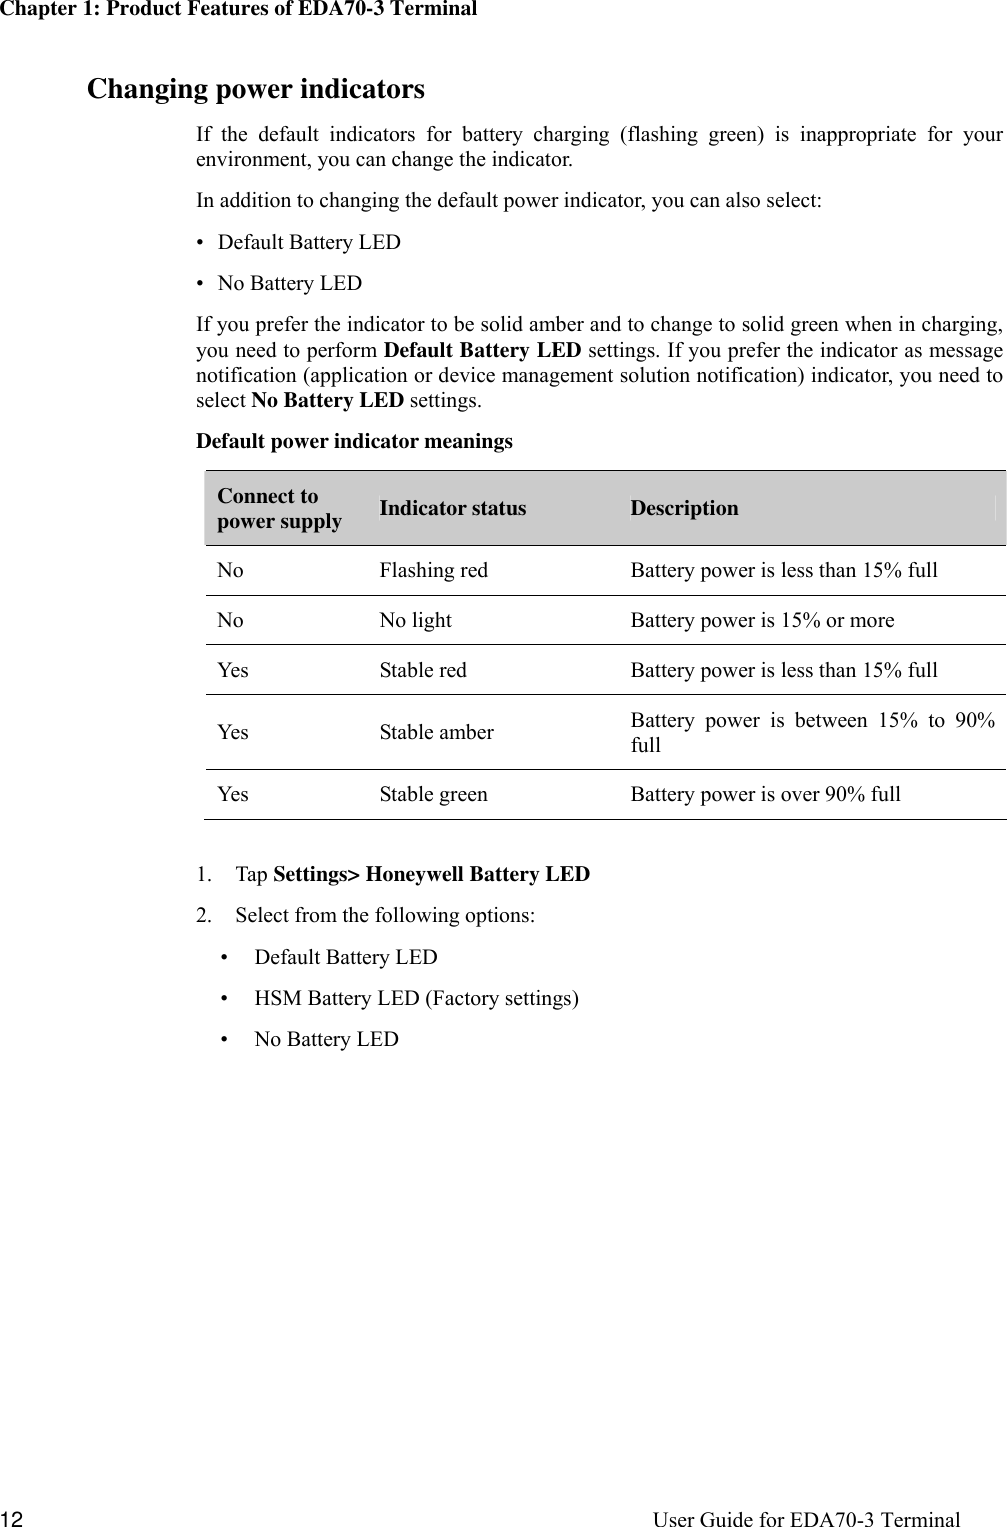 Page 18 of Honeywell EDA703 Tablet User Manual P1